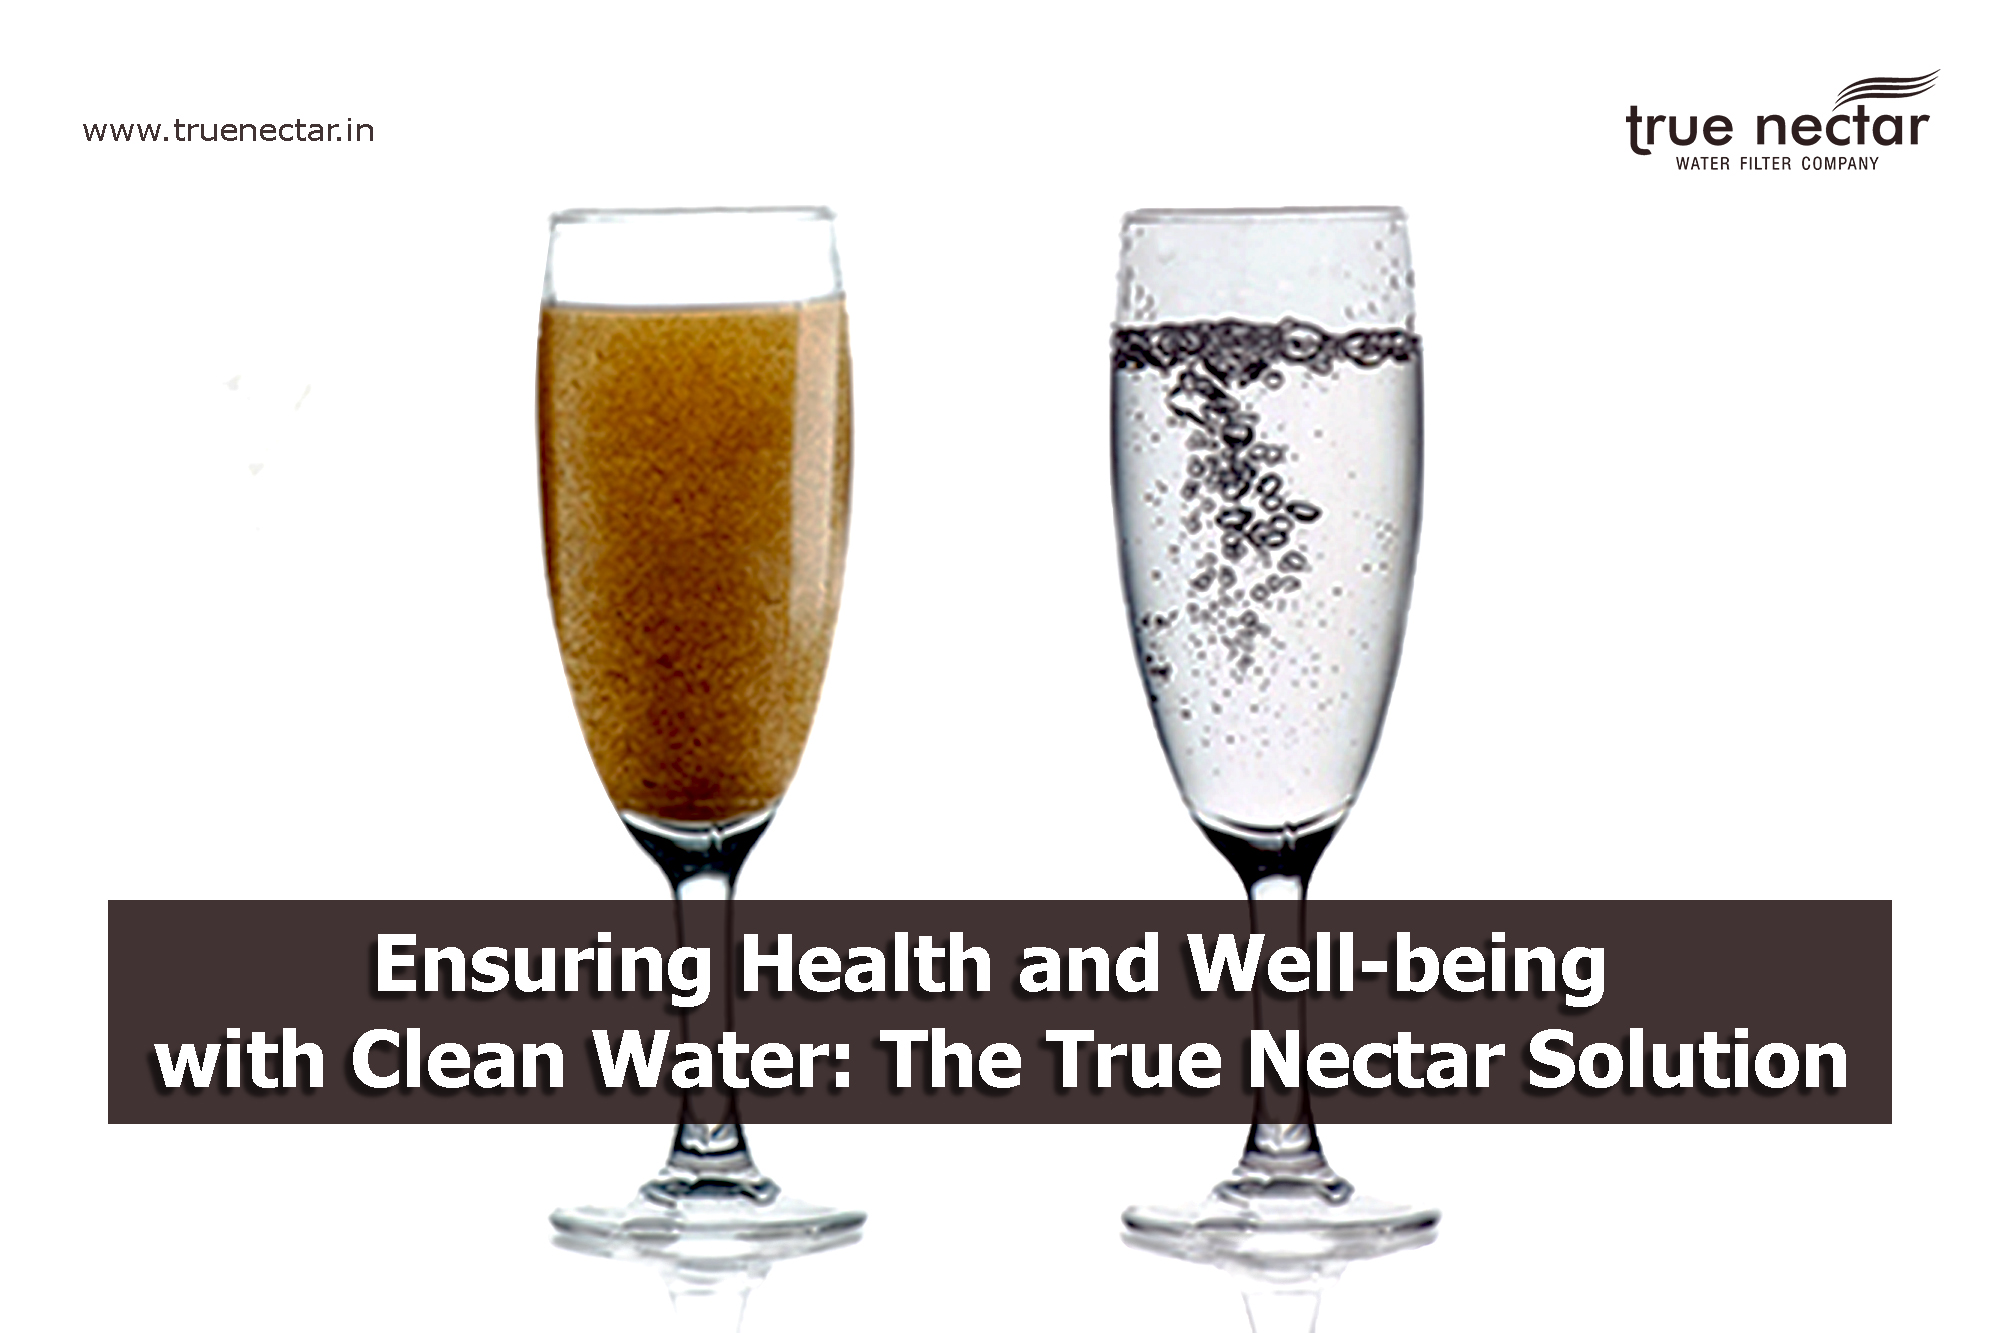 Ensuring Health and Well-being with Clean Water: The True Nectar Solution